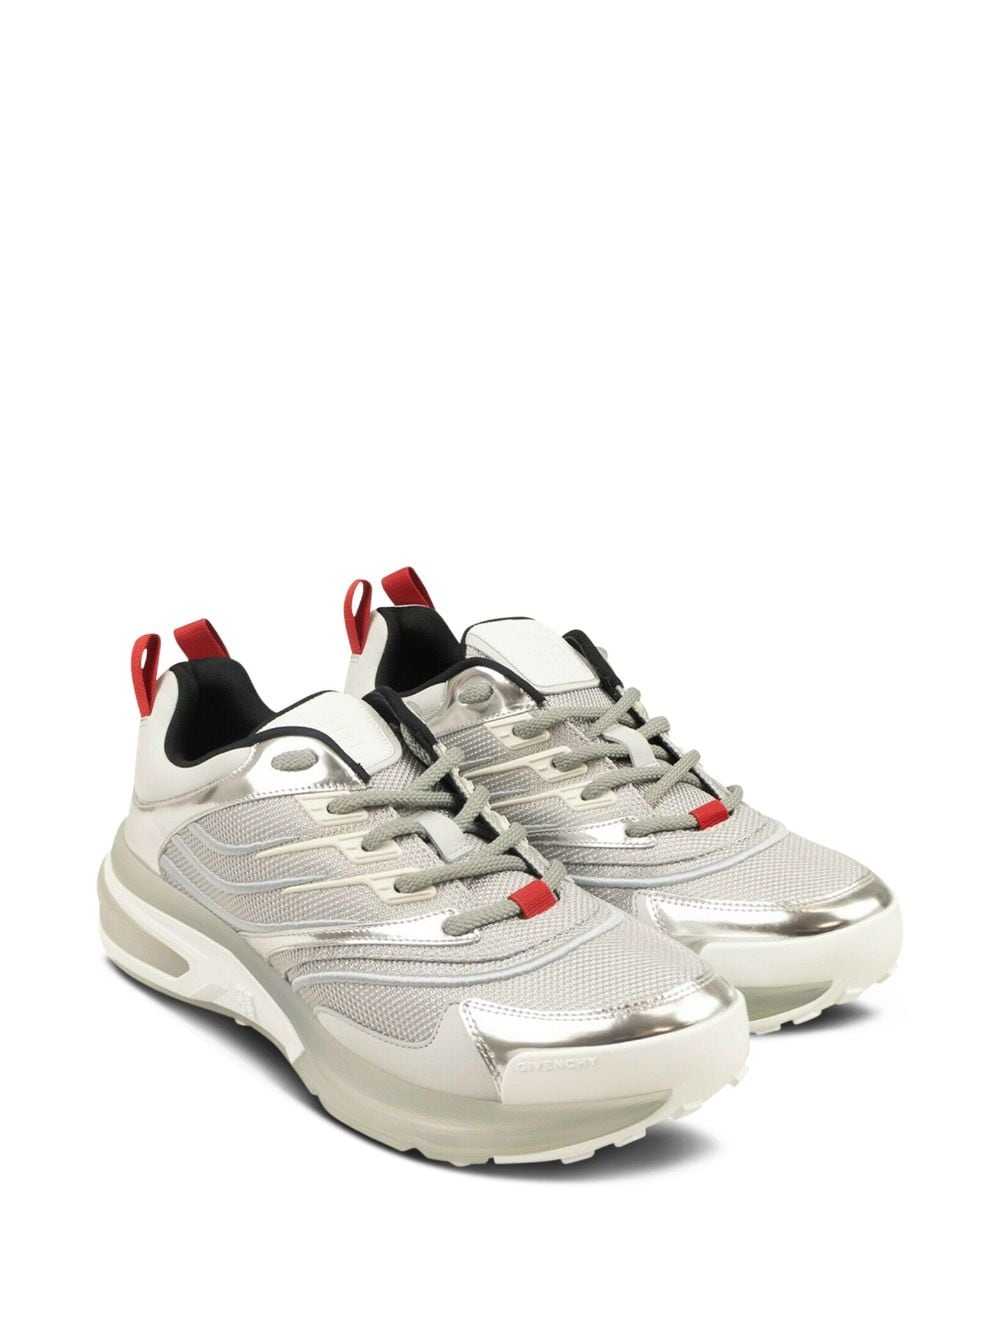 Givenchy Giv 1 "Silver" sneakers - Zilver